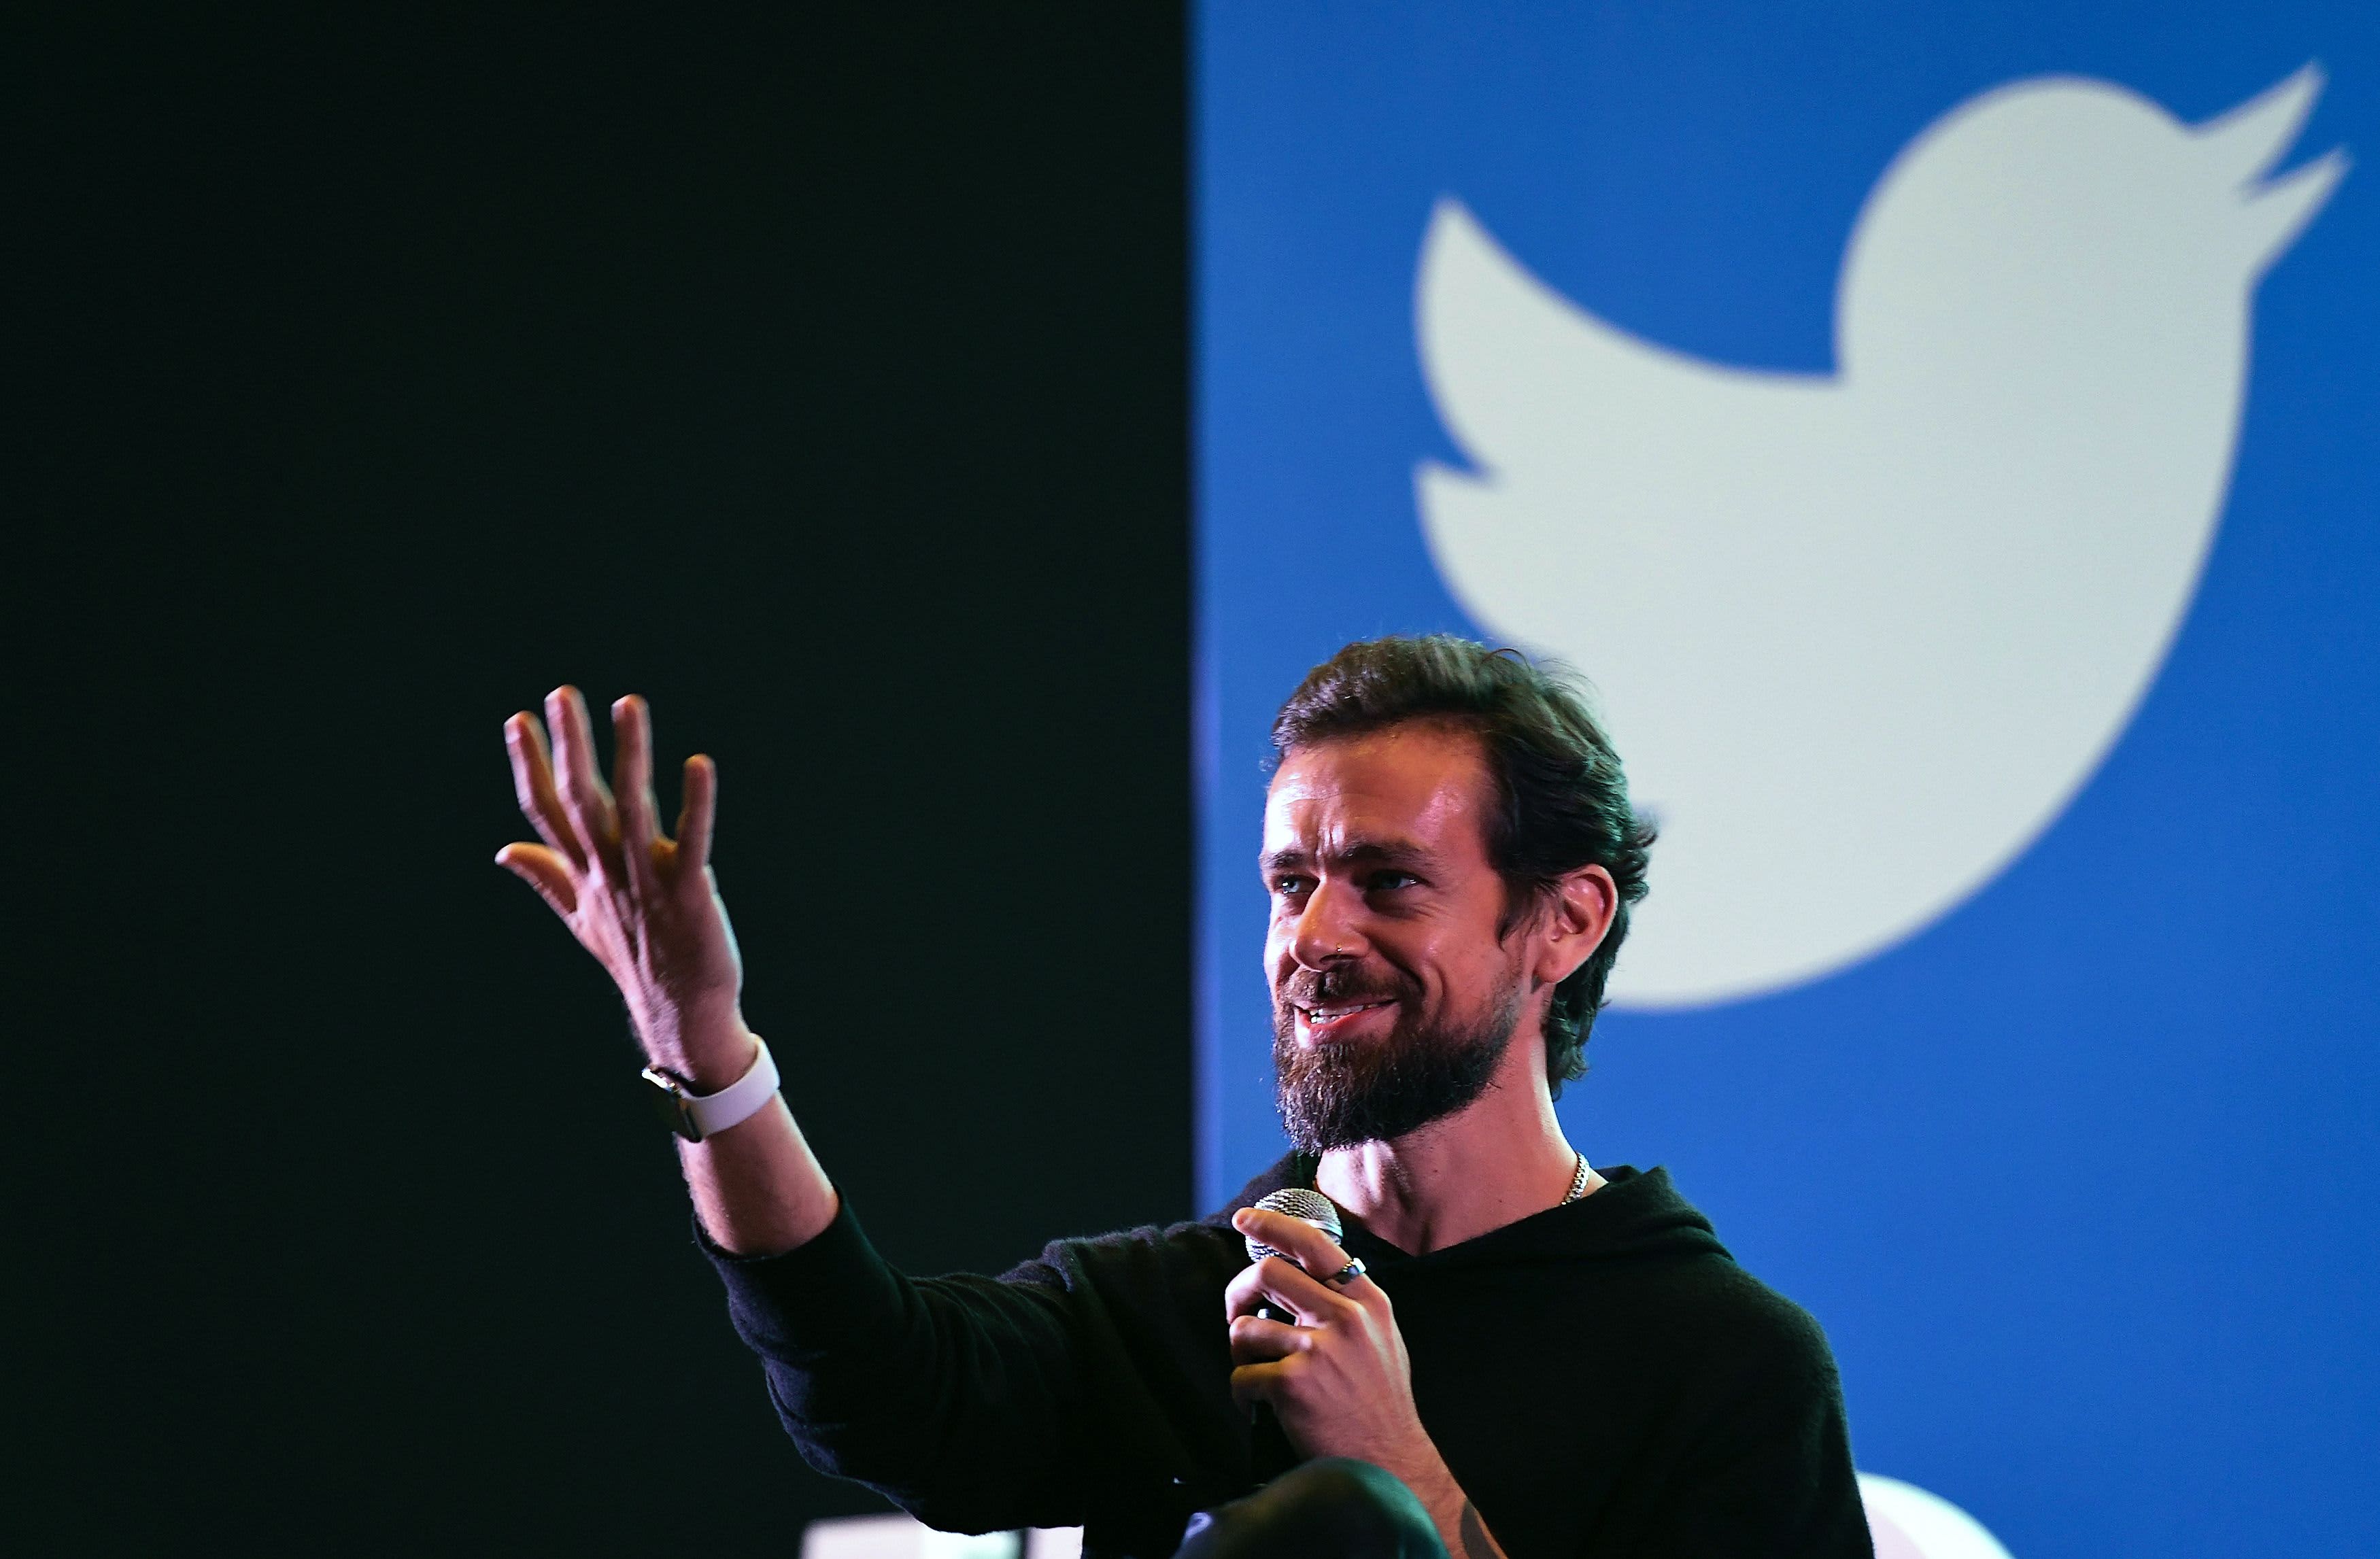 Jack Dorsey sells his first tweet as an NFT for more than $ 2.9 million